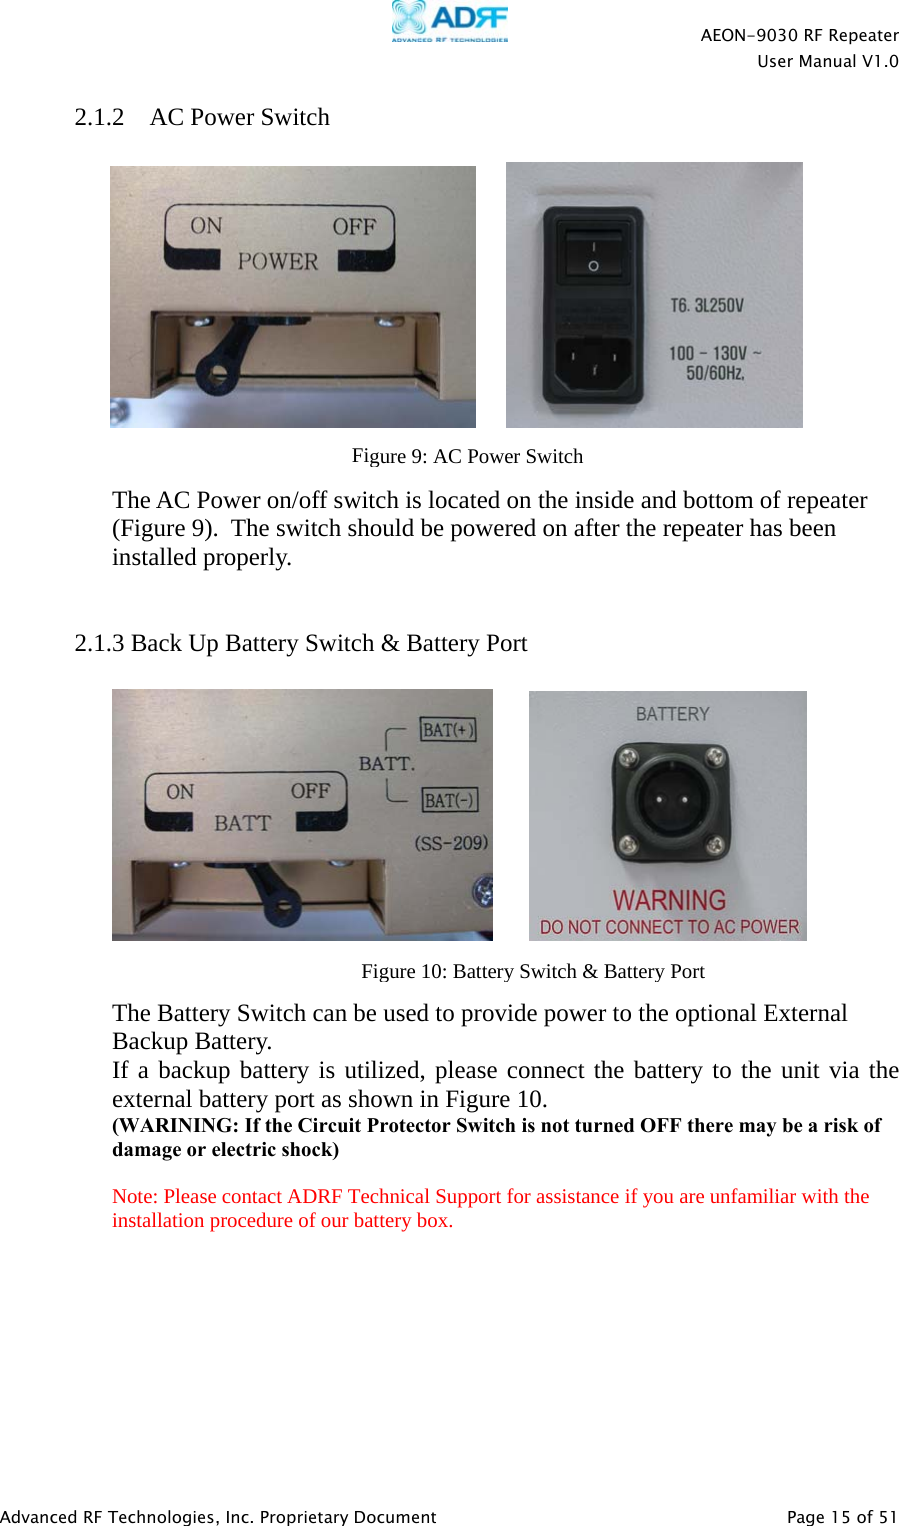    AEON-9030 RF Repeater  User Manual V1.0  Advanced RF Technologies, Inc. Proprietary Document   Page 15 of 51  2.1.2  AC Power Switch              The AC Power on/off switch is located on the inside and bottom of repeater (Figure 9).  The switch should be powered on after the repeater has been installed properly.   2.1.3 Back Up Battery Switch &amp; Battery Port            The Battery Switch can be used to provide power to the optional External Backup Battery.  If a backup battery is utilized, please connect the battery to the unit via the external battery port as shown in Figure 10. (WARINING: If the Circuit Protector Switch is not turned OFF there may be a risk of damage or electric shock)  Note: Please contact ADRF Technical Support for assistance if you are unfamiliar with the installation procedure of our battery box.Figure 9: AC Power SwitchFigure 10: Battery Switch &amp; Battery Port